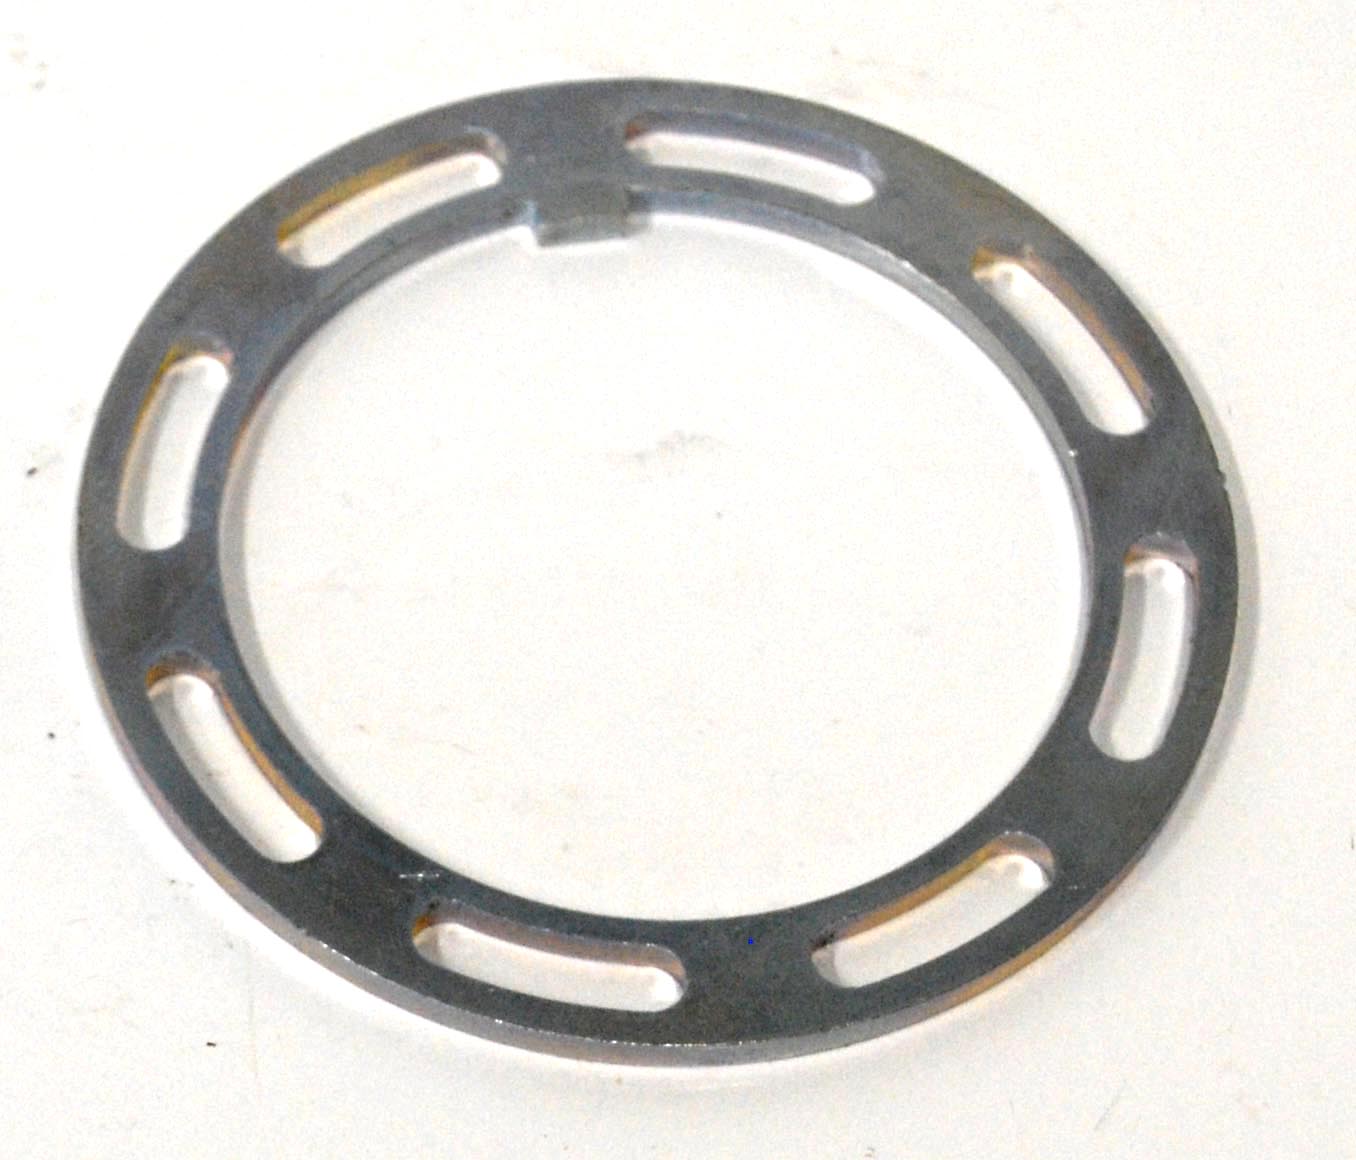 4277 - GN Slotted Lock Washer